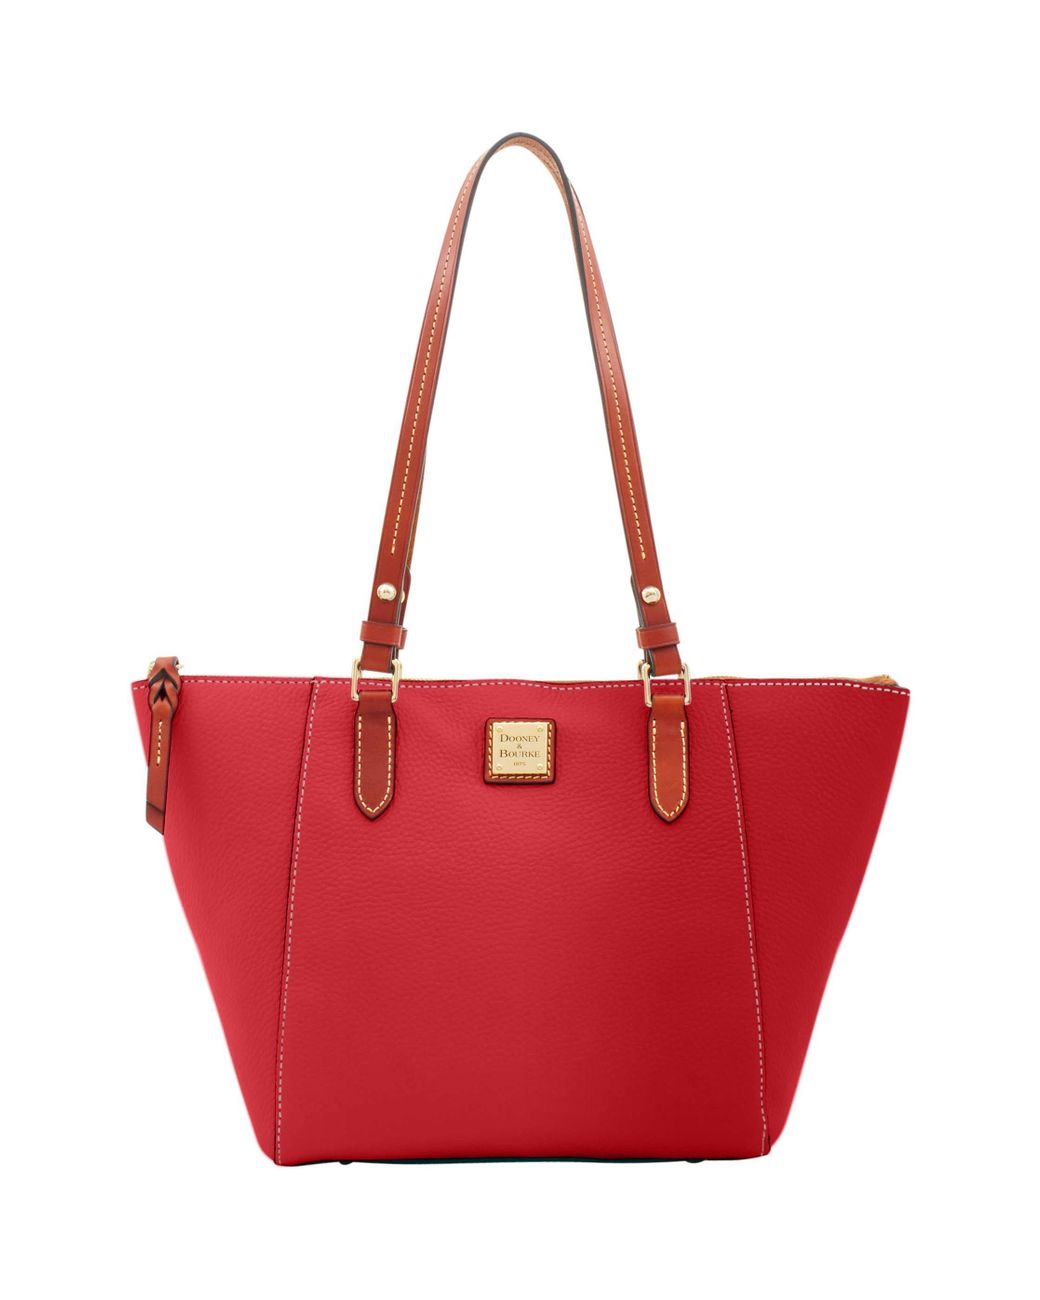 Dooney & Bourke Leather Pebble Grain Maxine Tote in Red | Lyst